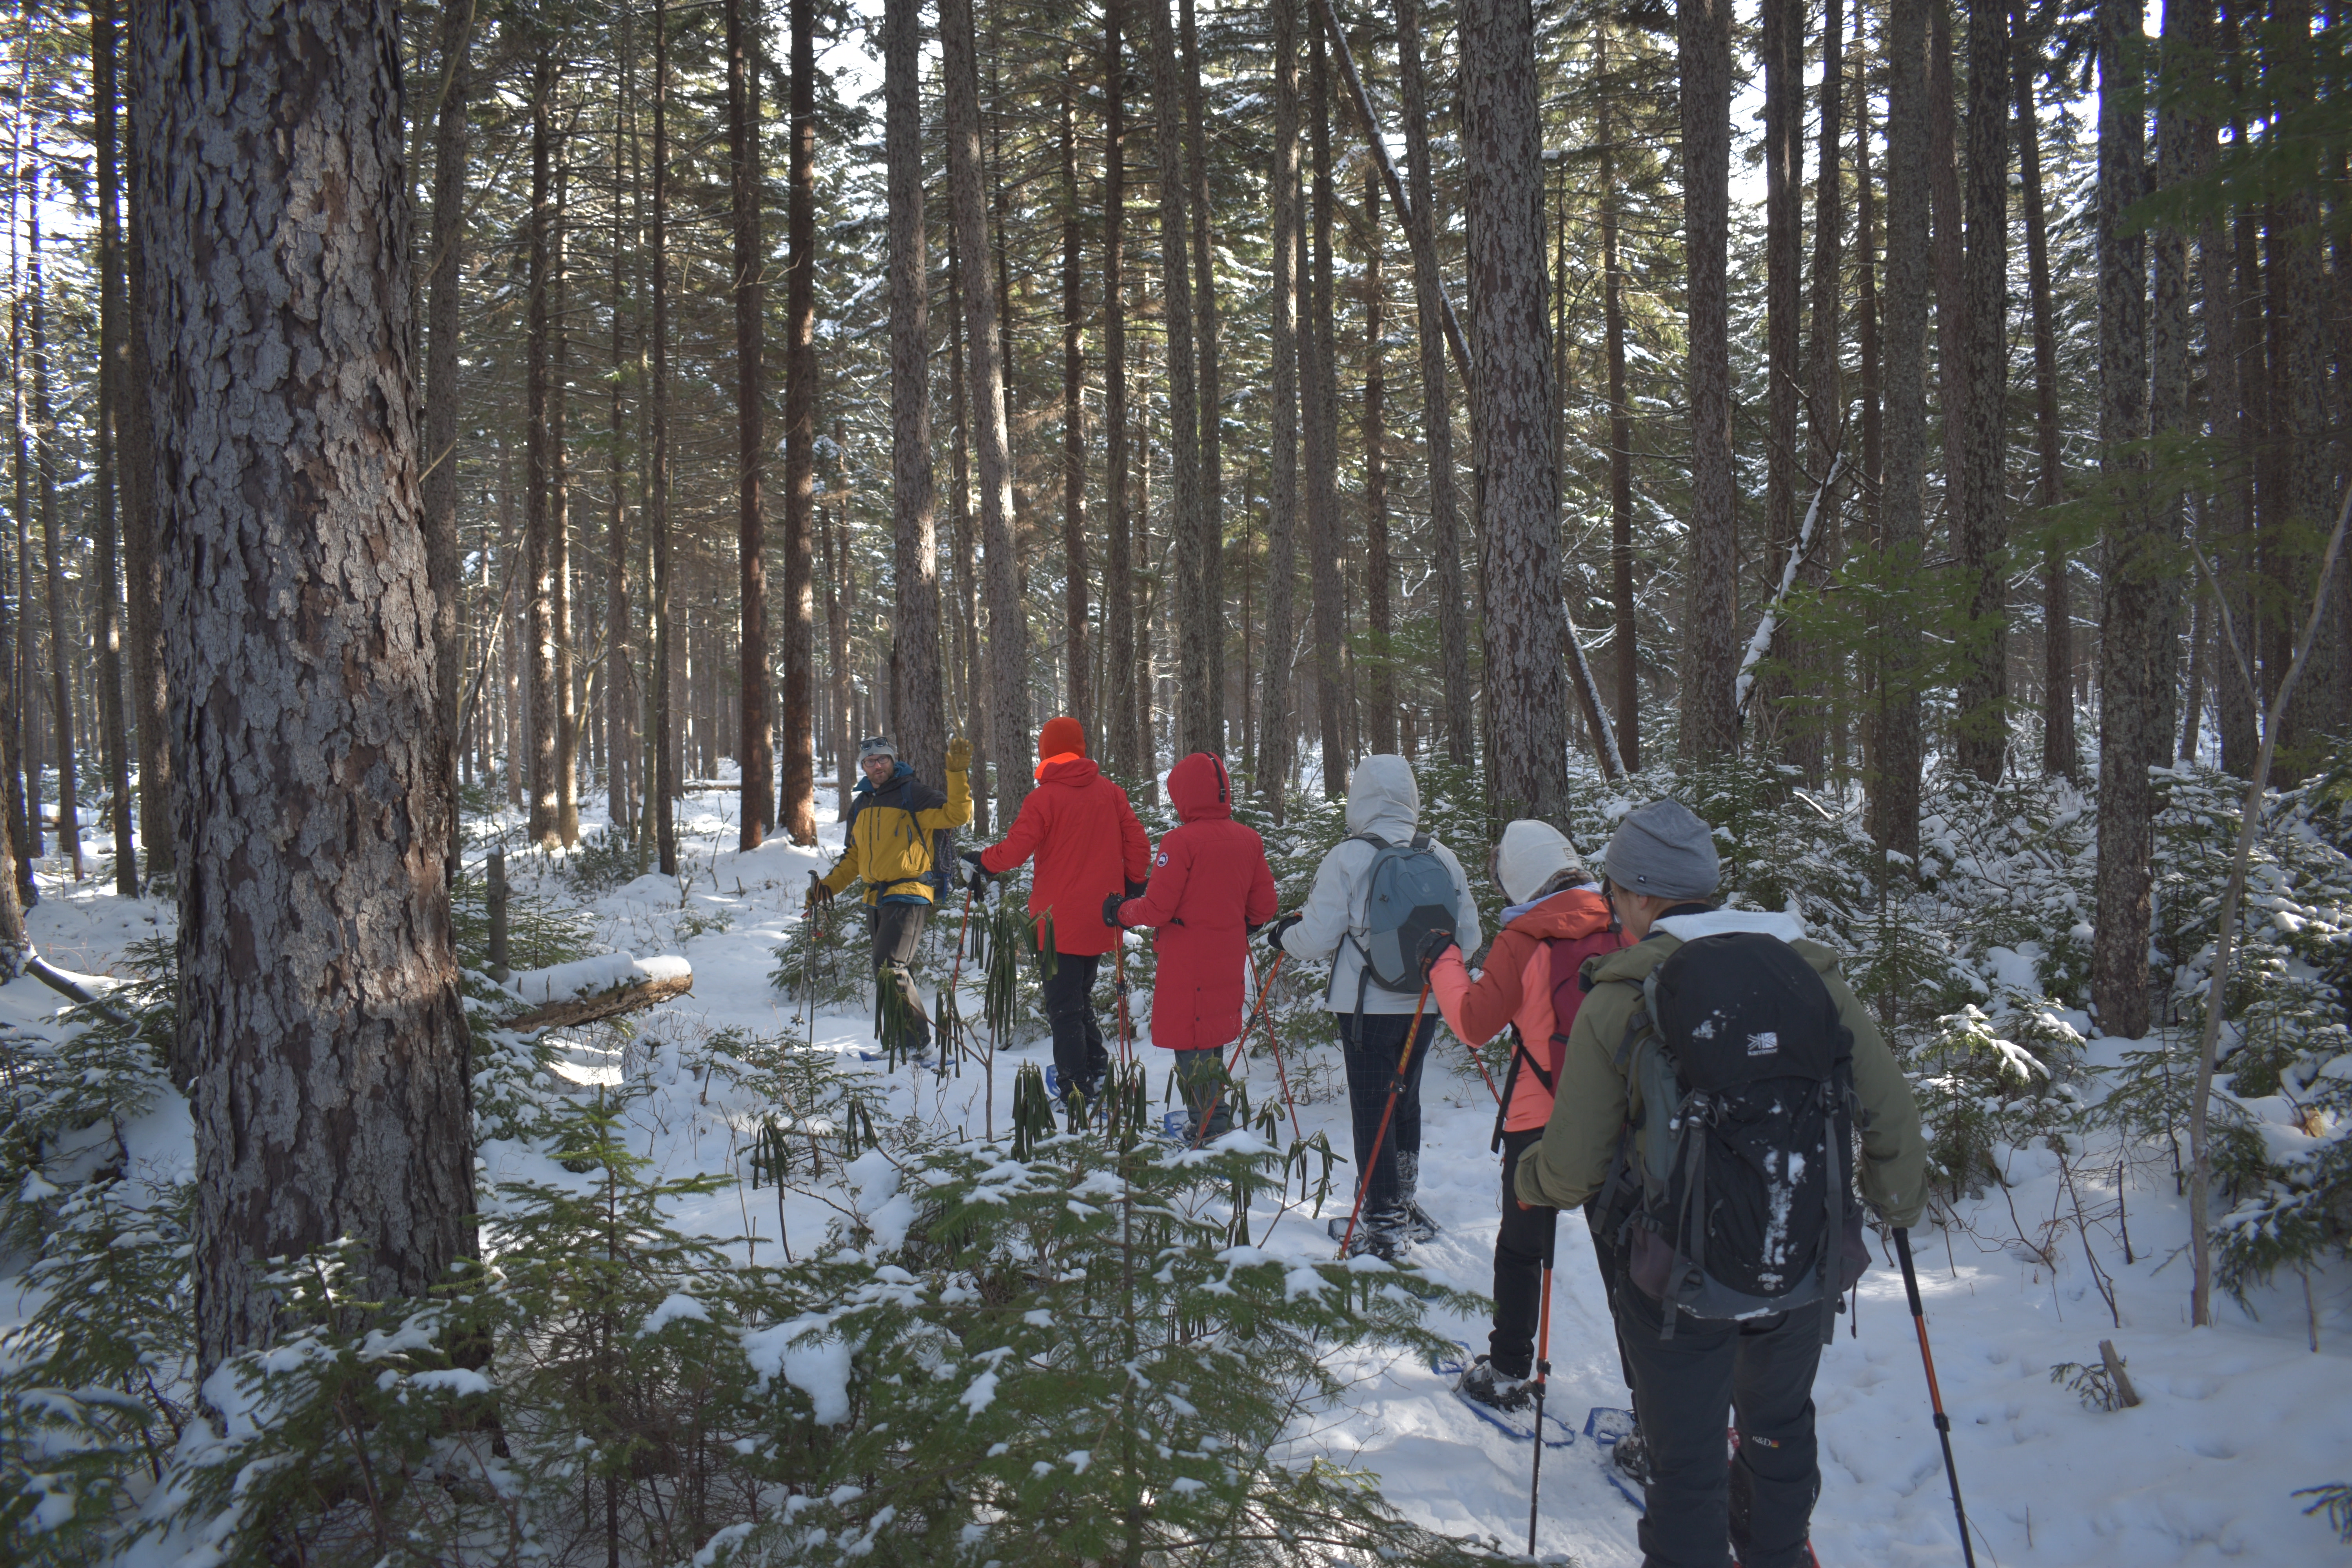 Richard explains features of the forest to guests as they snowshoe.